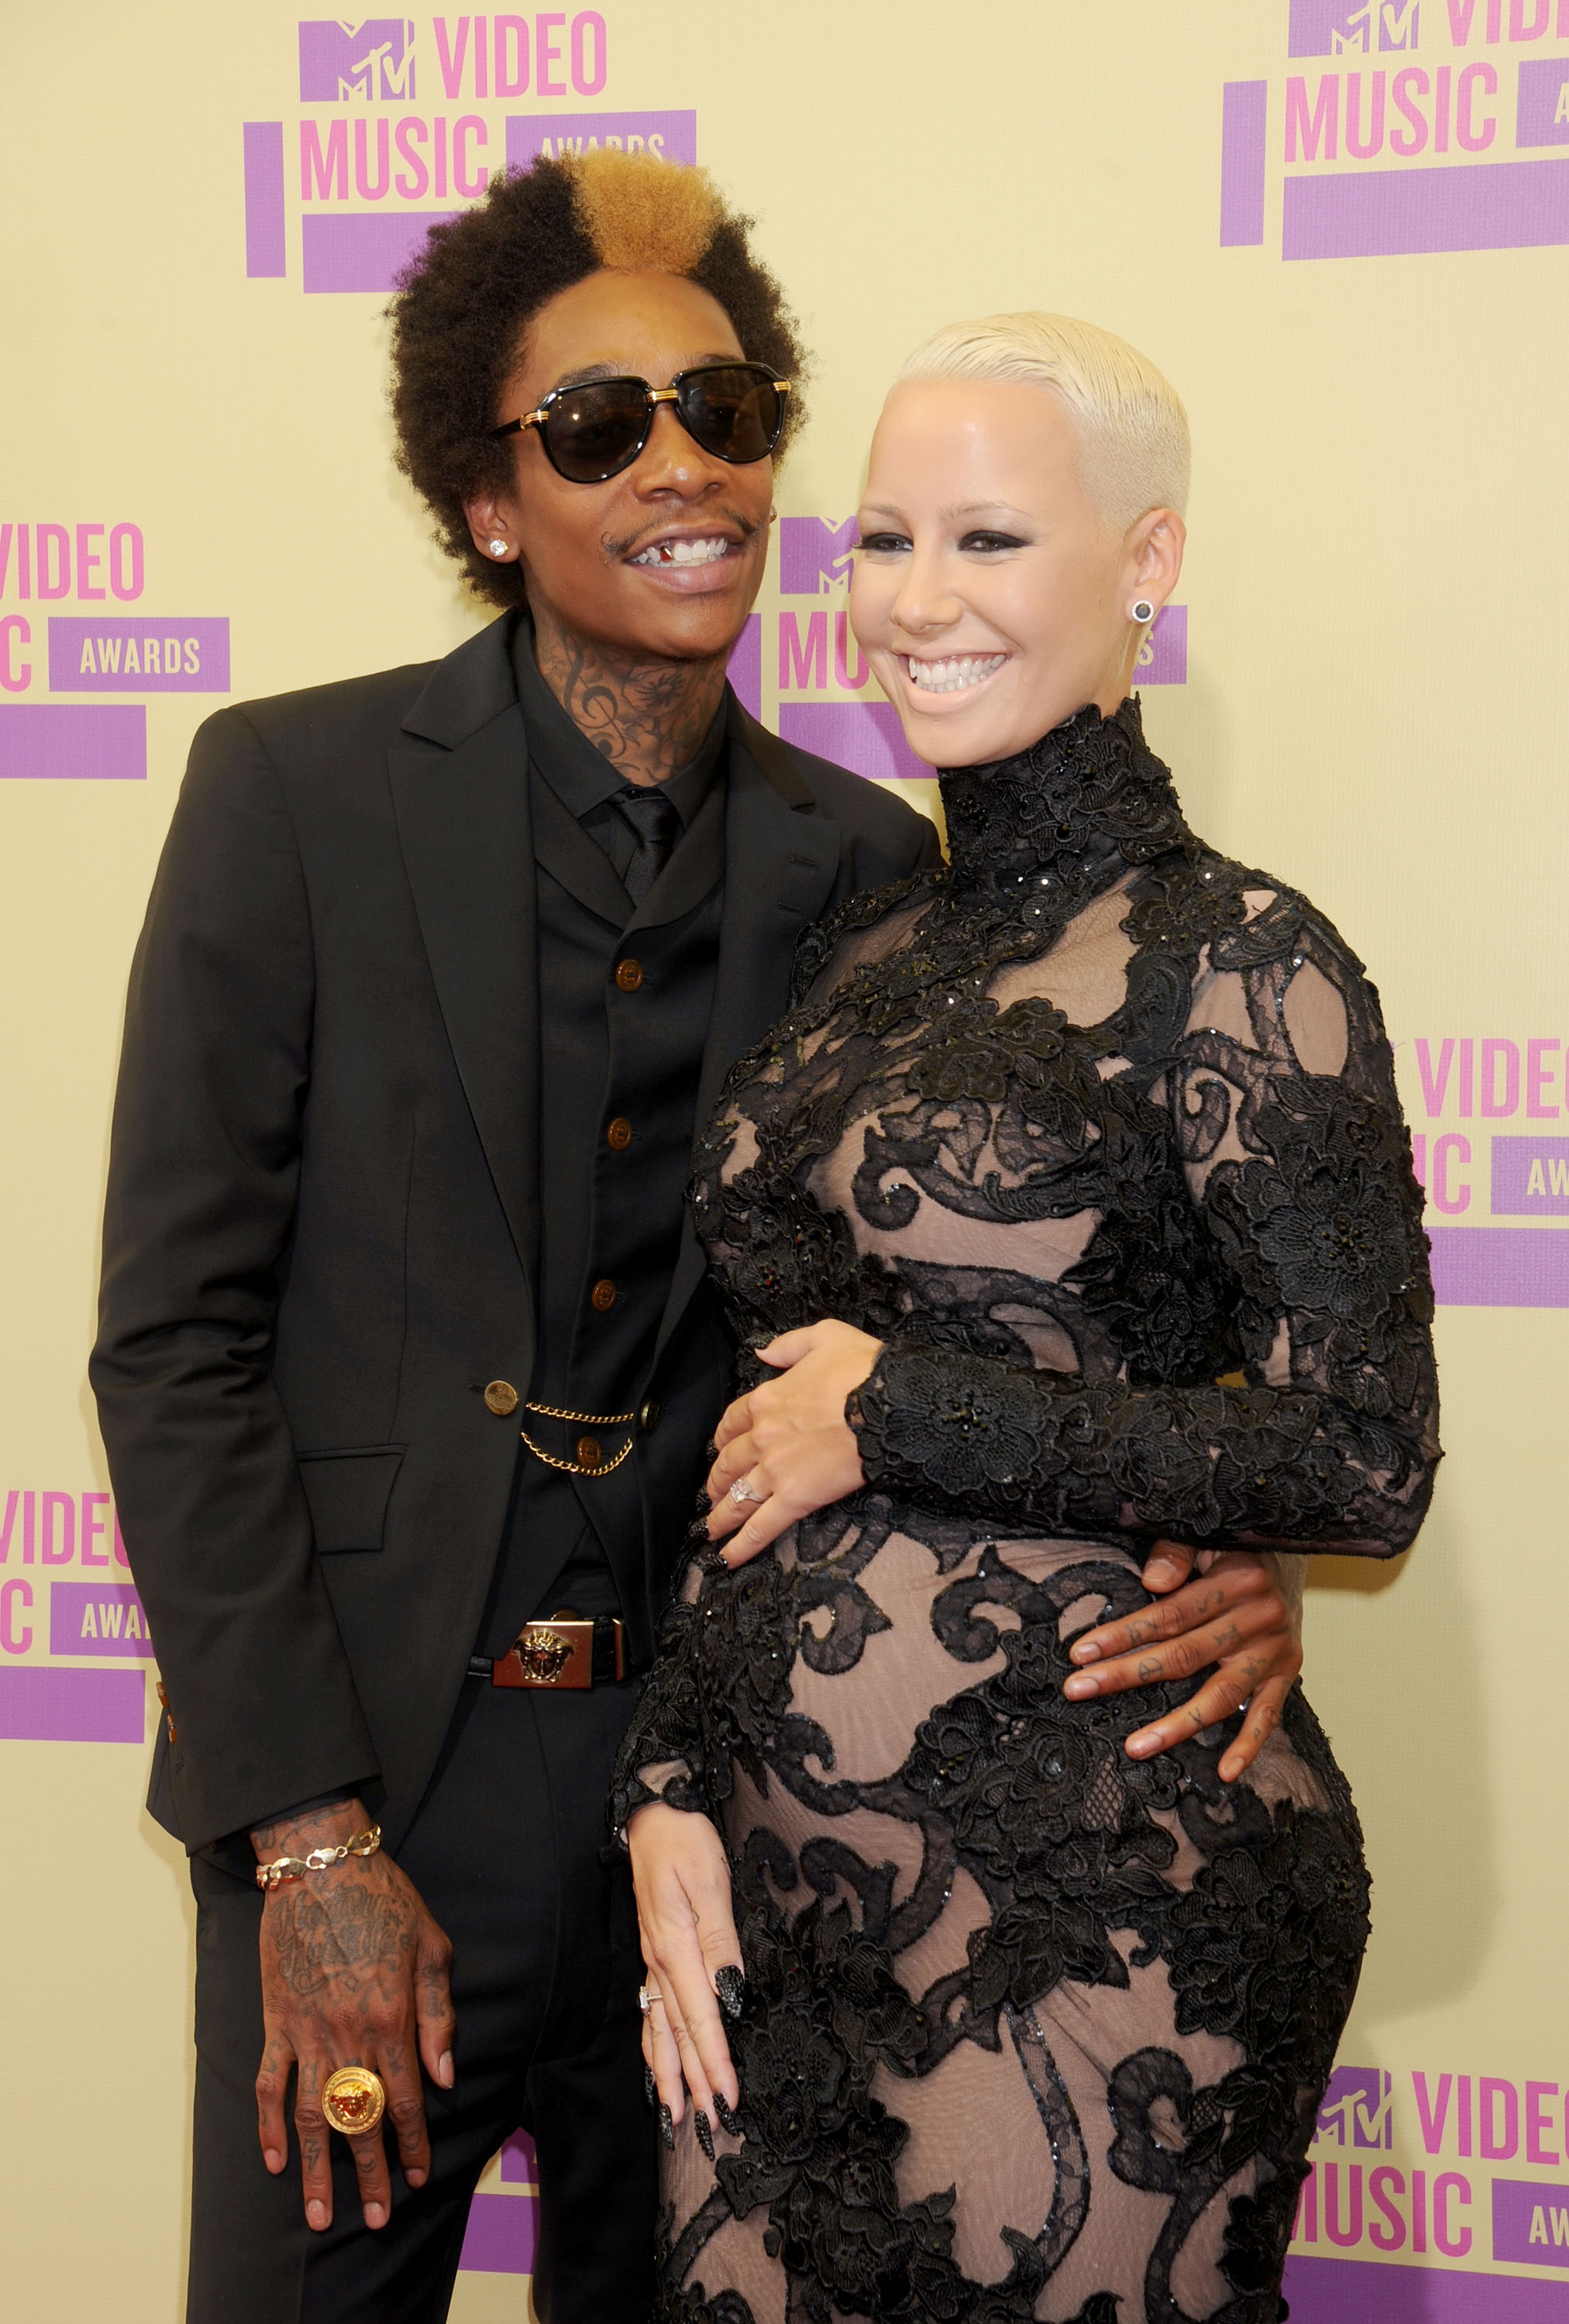 Amber Rose and Wiz Khalifa in happier times. Gregg Deguire/Getty